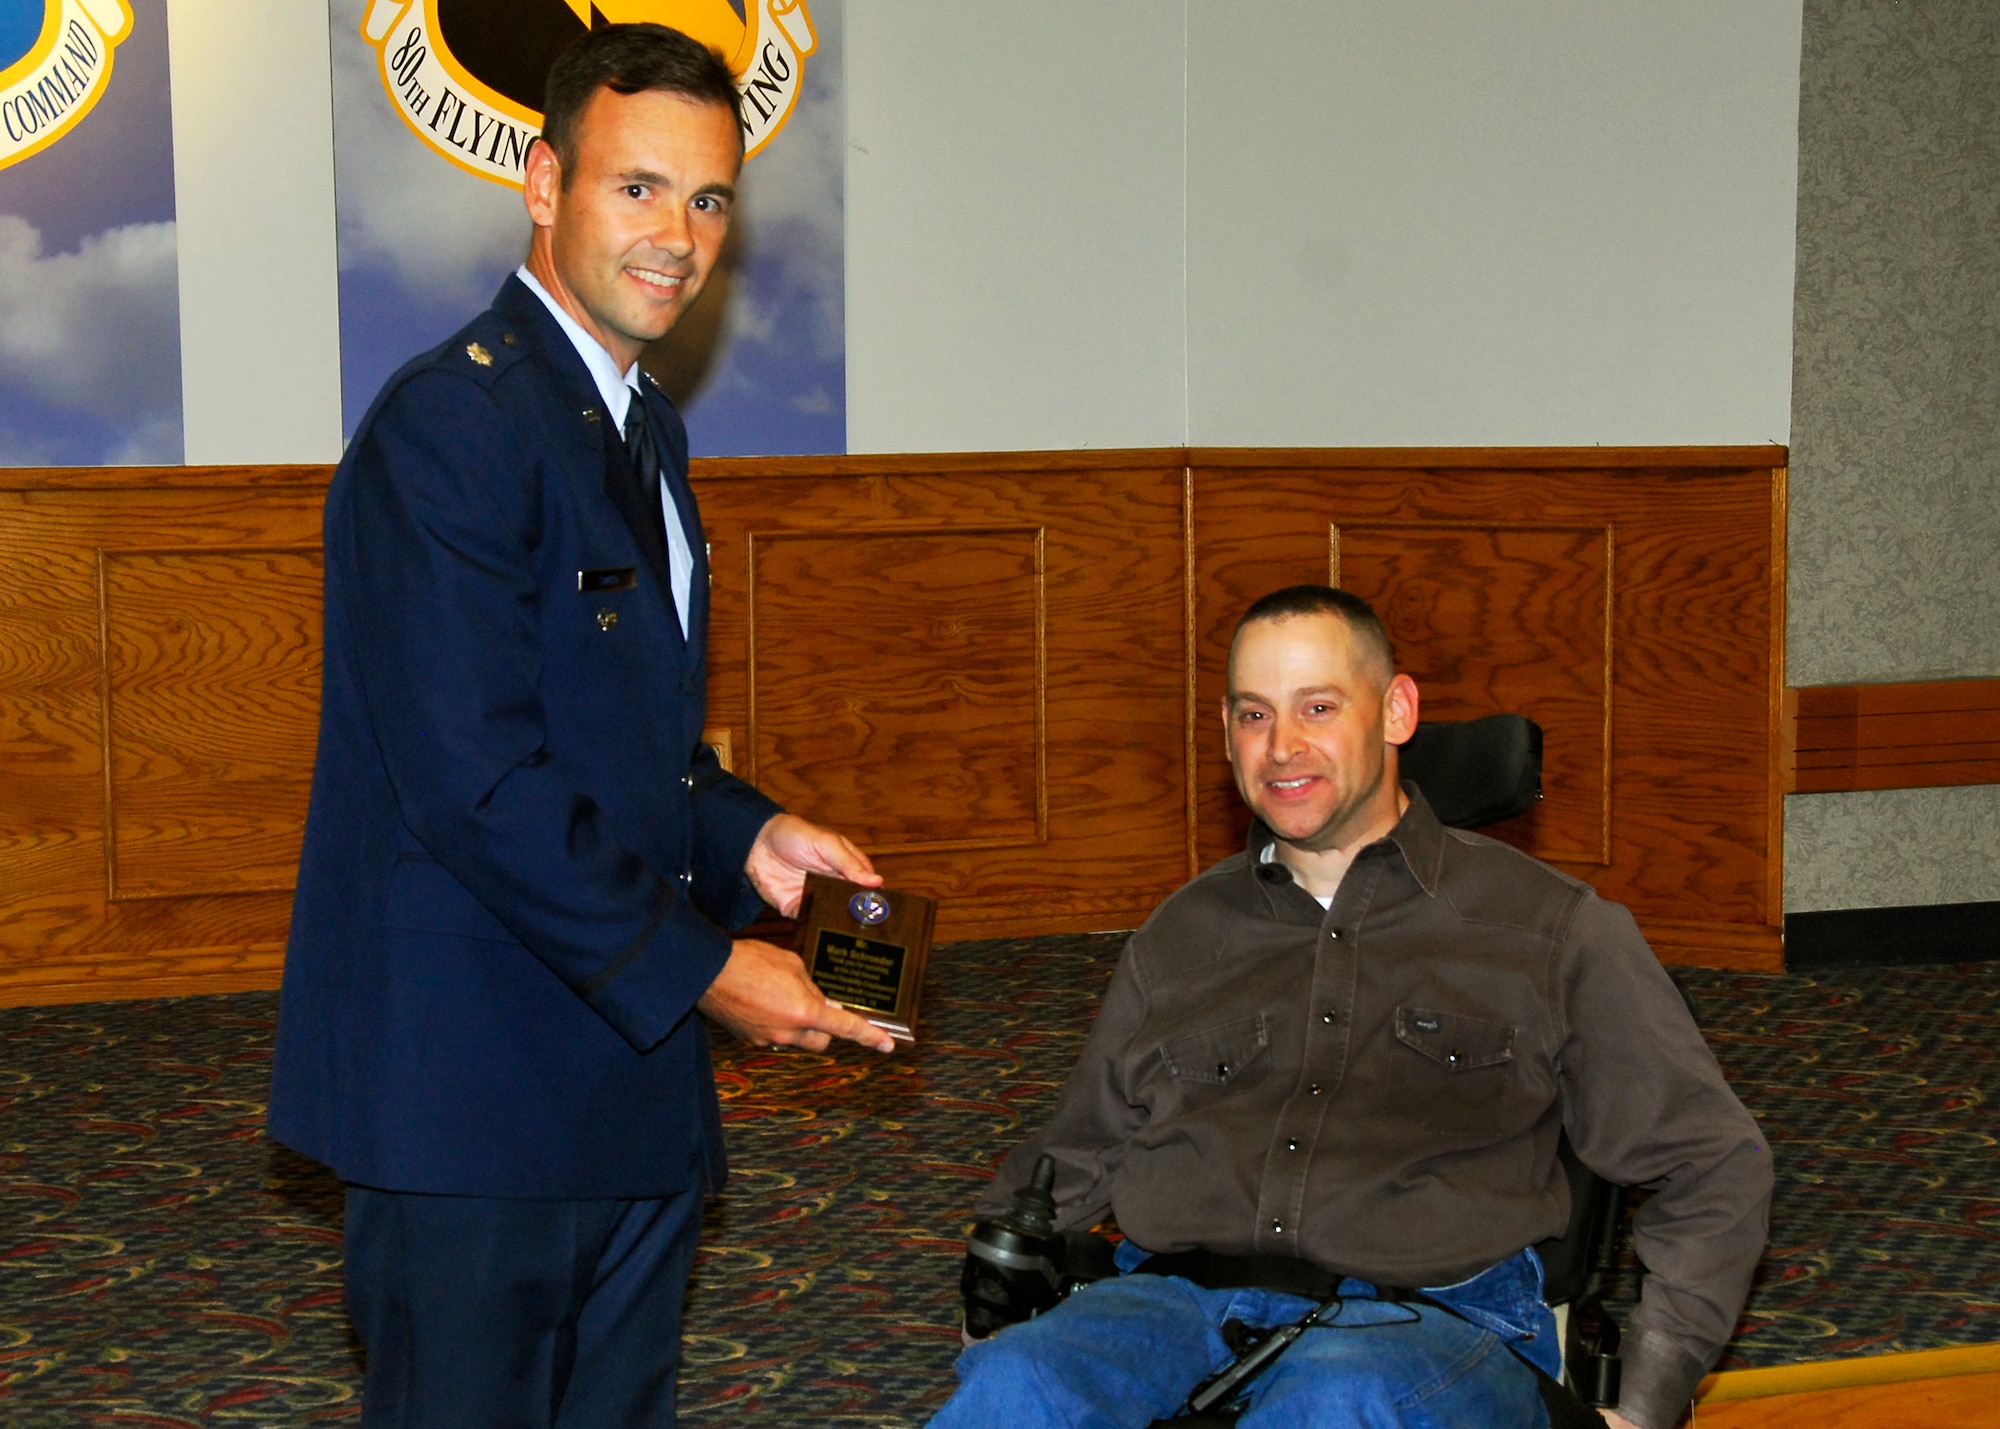 Lt. Col. Porter Smith, 82nd Mission Support Group Deputy Commander, presents Mark Schroeder, 82nd Communications Squadron, a plaque for speaking at the National Disability Employment Awareness Month luncheon Oct. 23 at the Sheppard Club. (U.S. Air Force photo/Harry Tonemah)